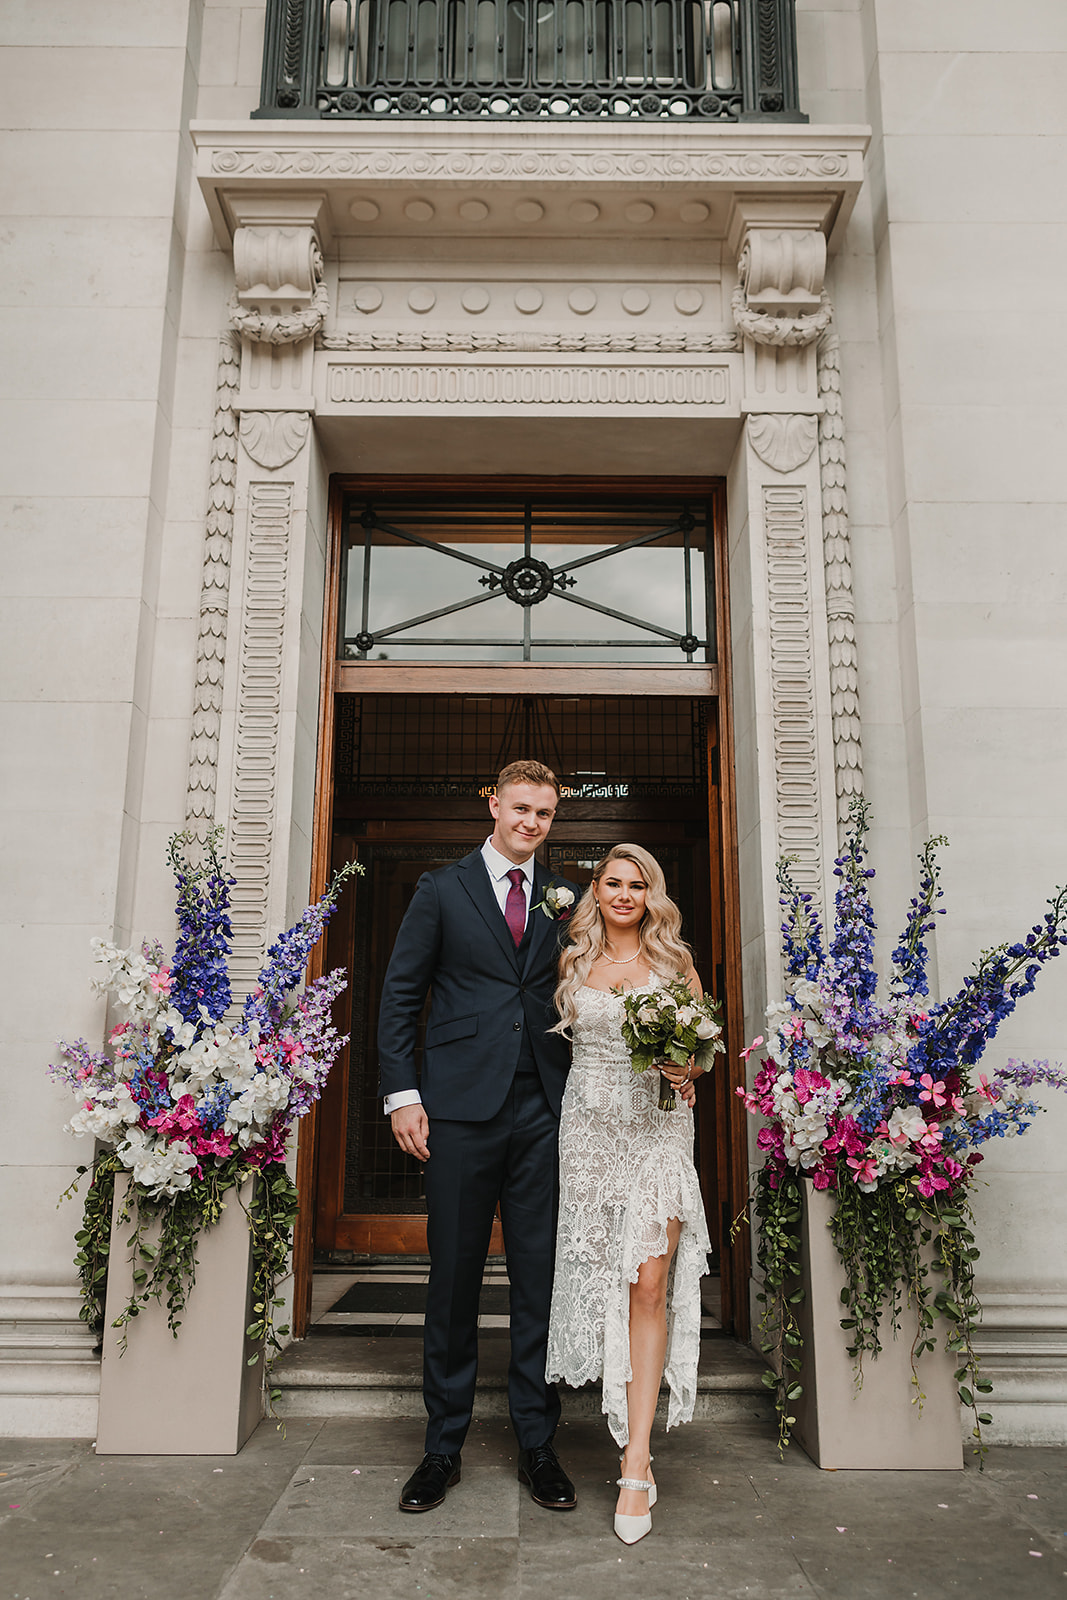 Couple at civil wedding at Marylebone Town Hall in London